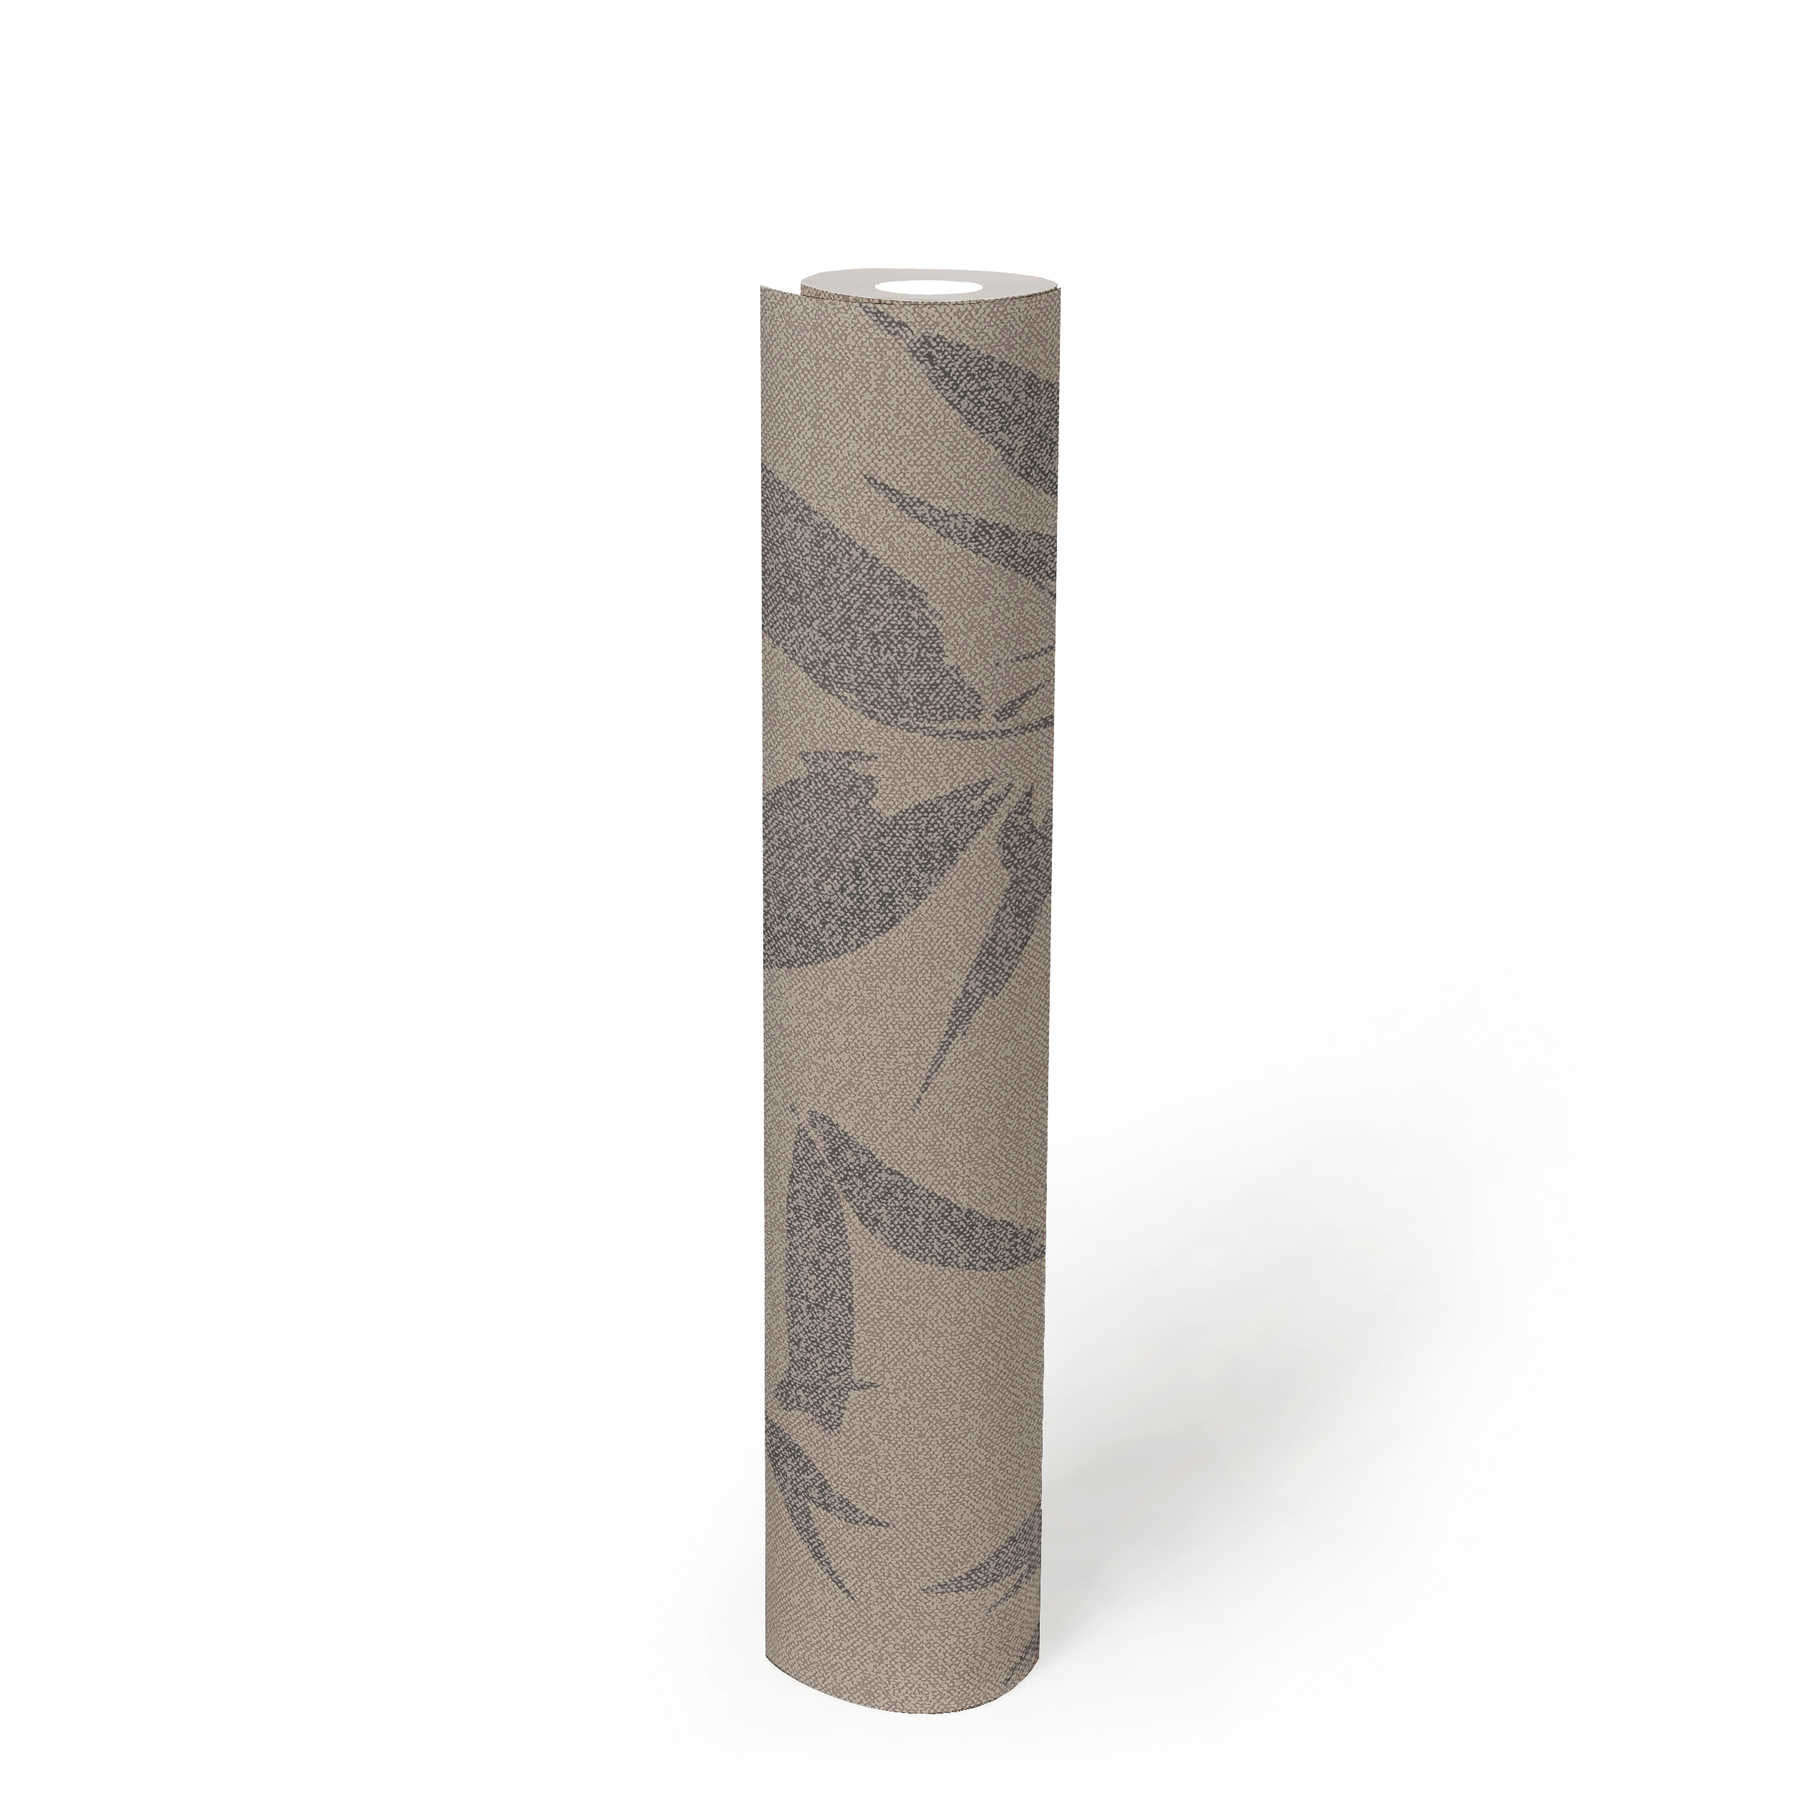             Non-woven wallpaper leaf motif abstract, textile look - brown, beige
        